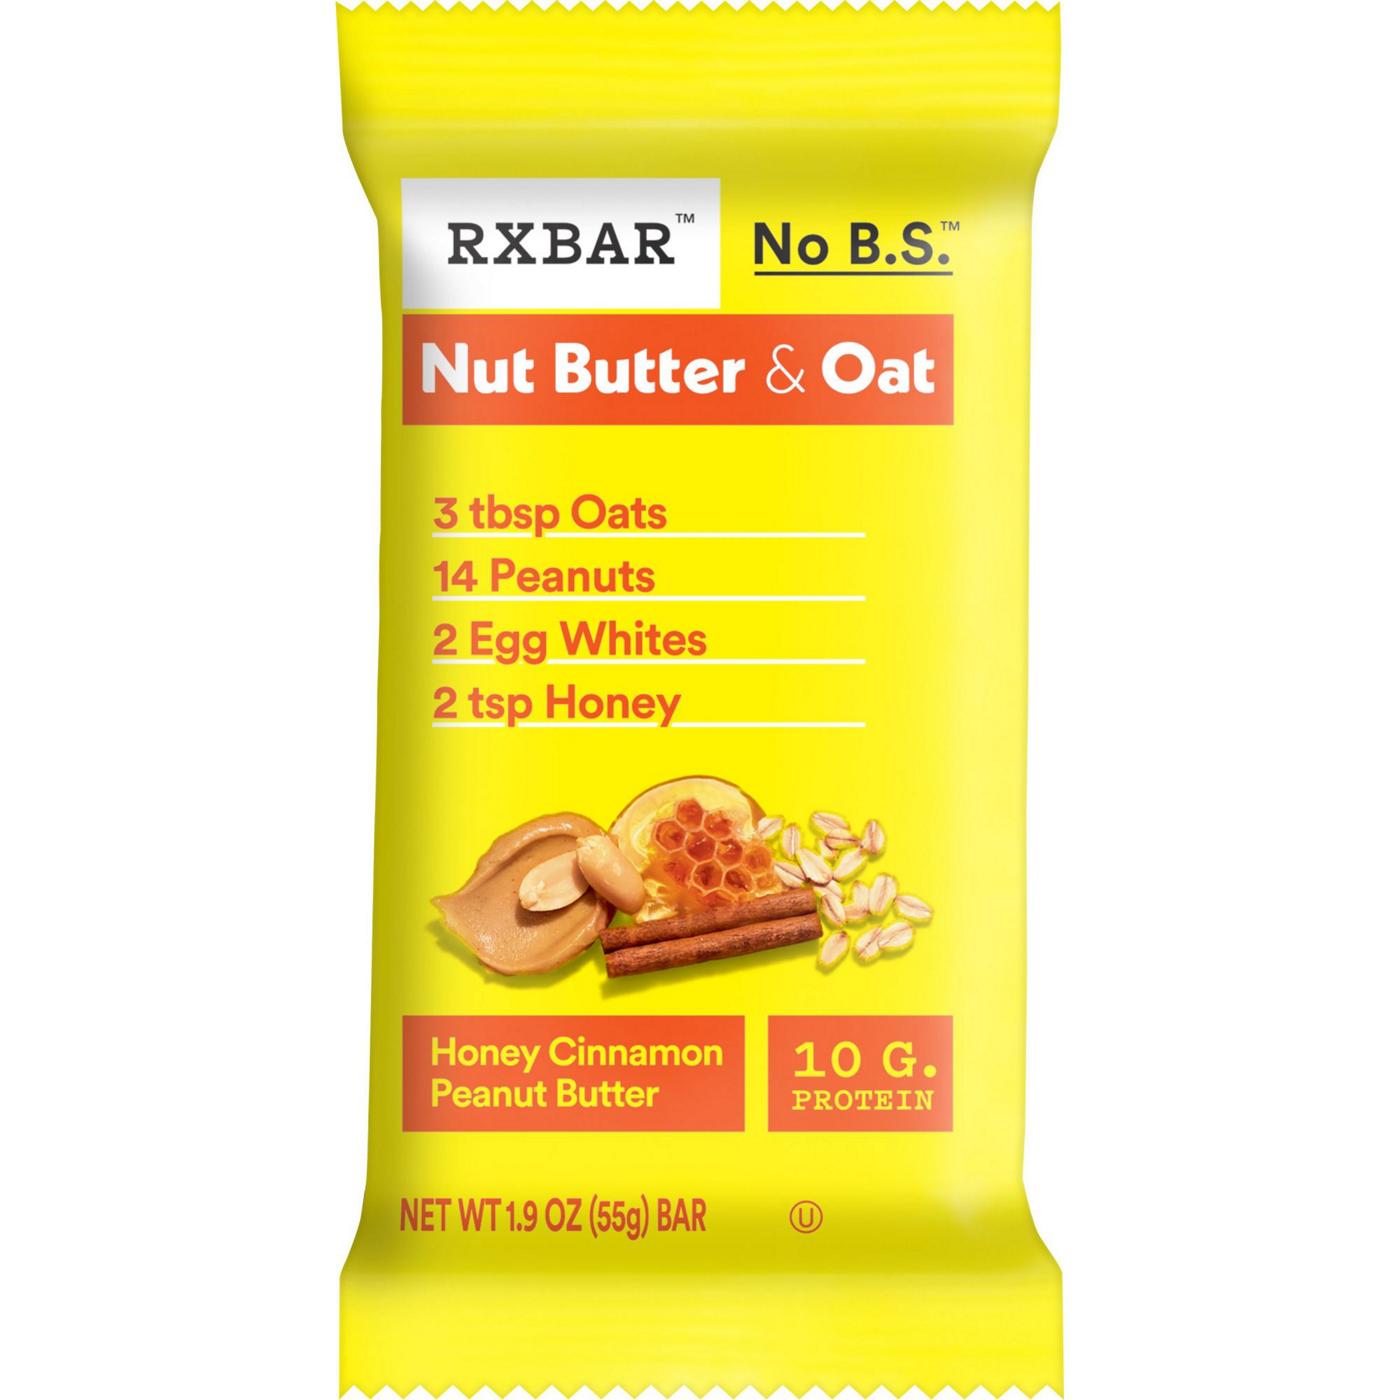 RXBAR Nut Butter and Oat Honey Cinnamon Peanut Butter Protein Bars; image 1 of 2